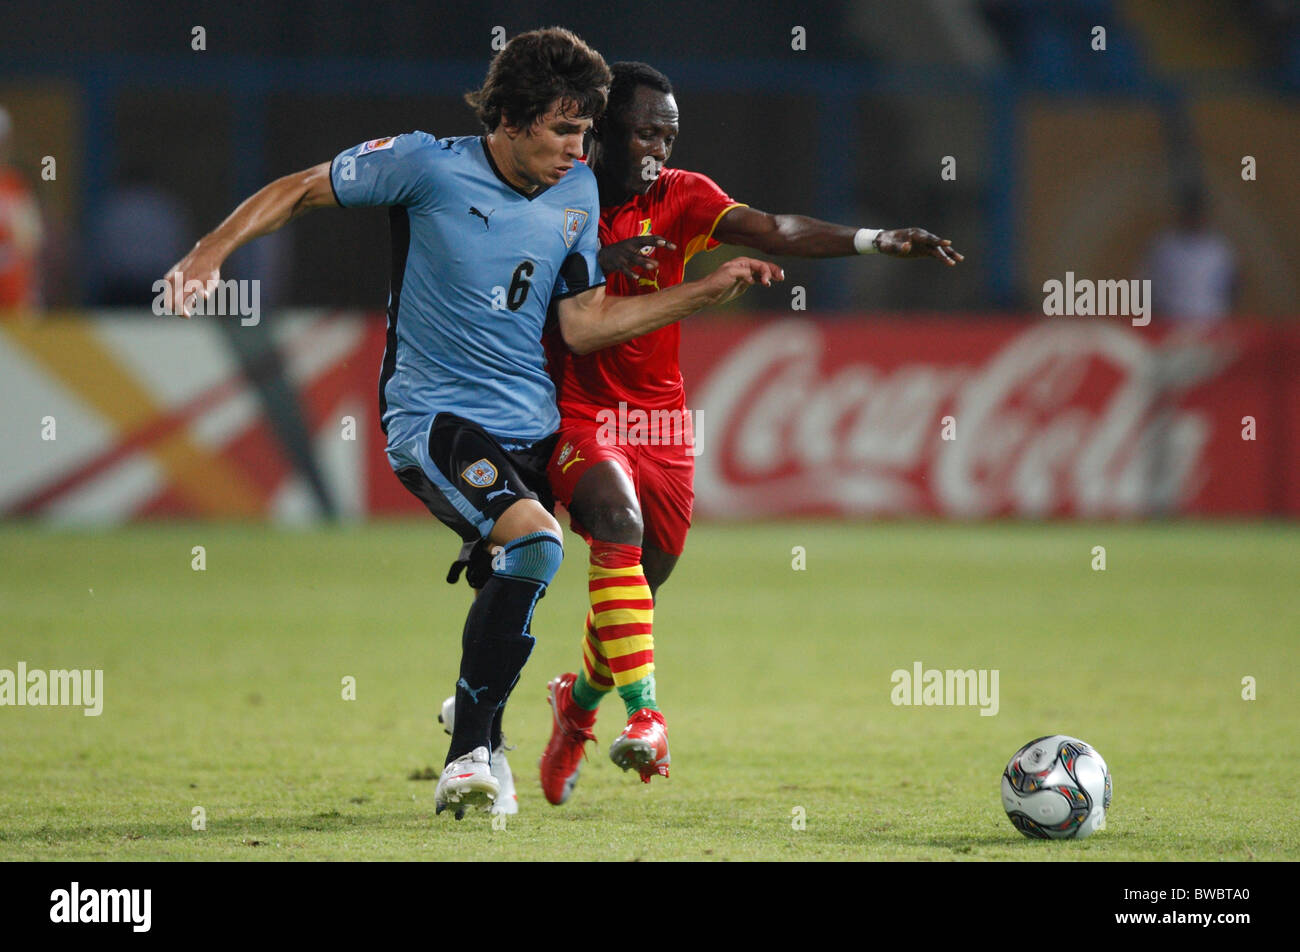 Leandro Cabrera of Uruguay (l) and Emmanuel Agyemang Badu of Ghana (r) fight for the ball during a 2009 FIFA U20 World Cup match Stock Photo